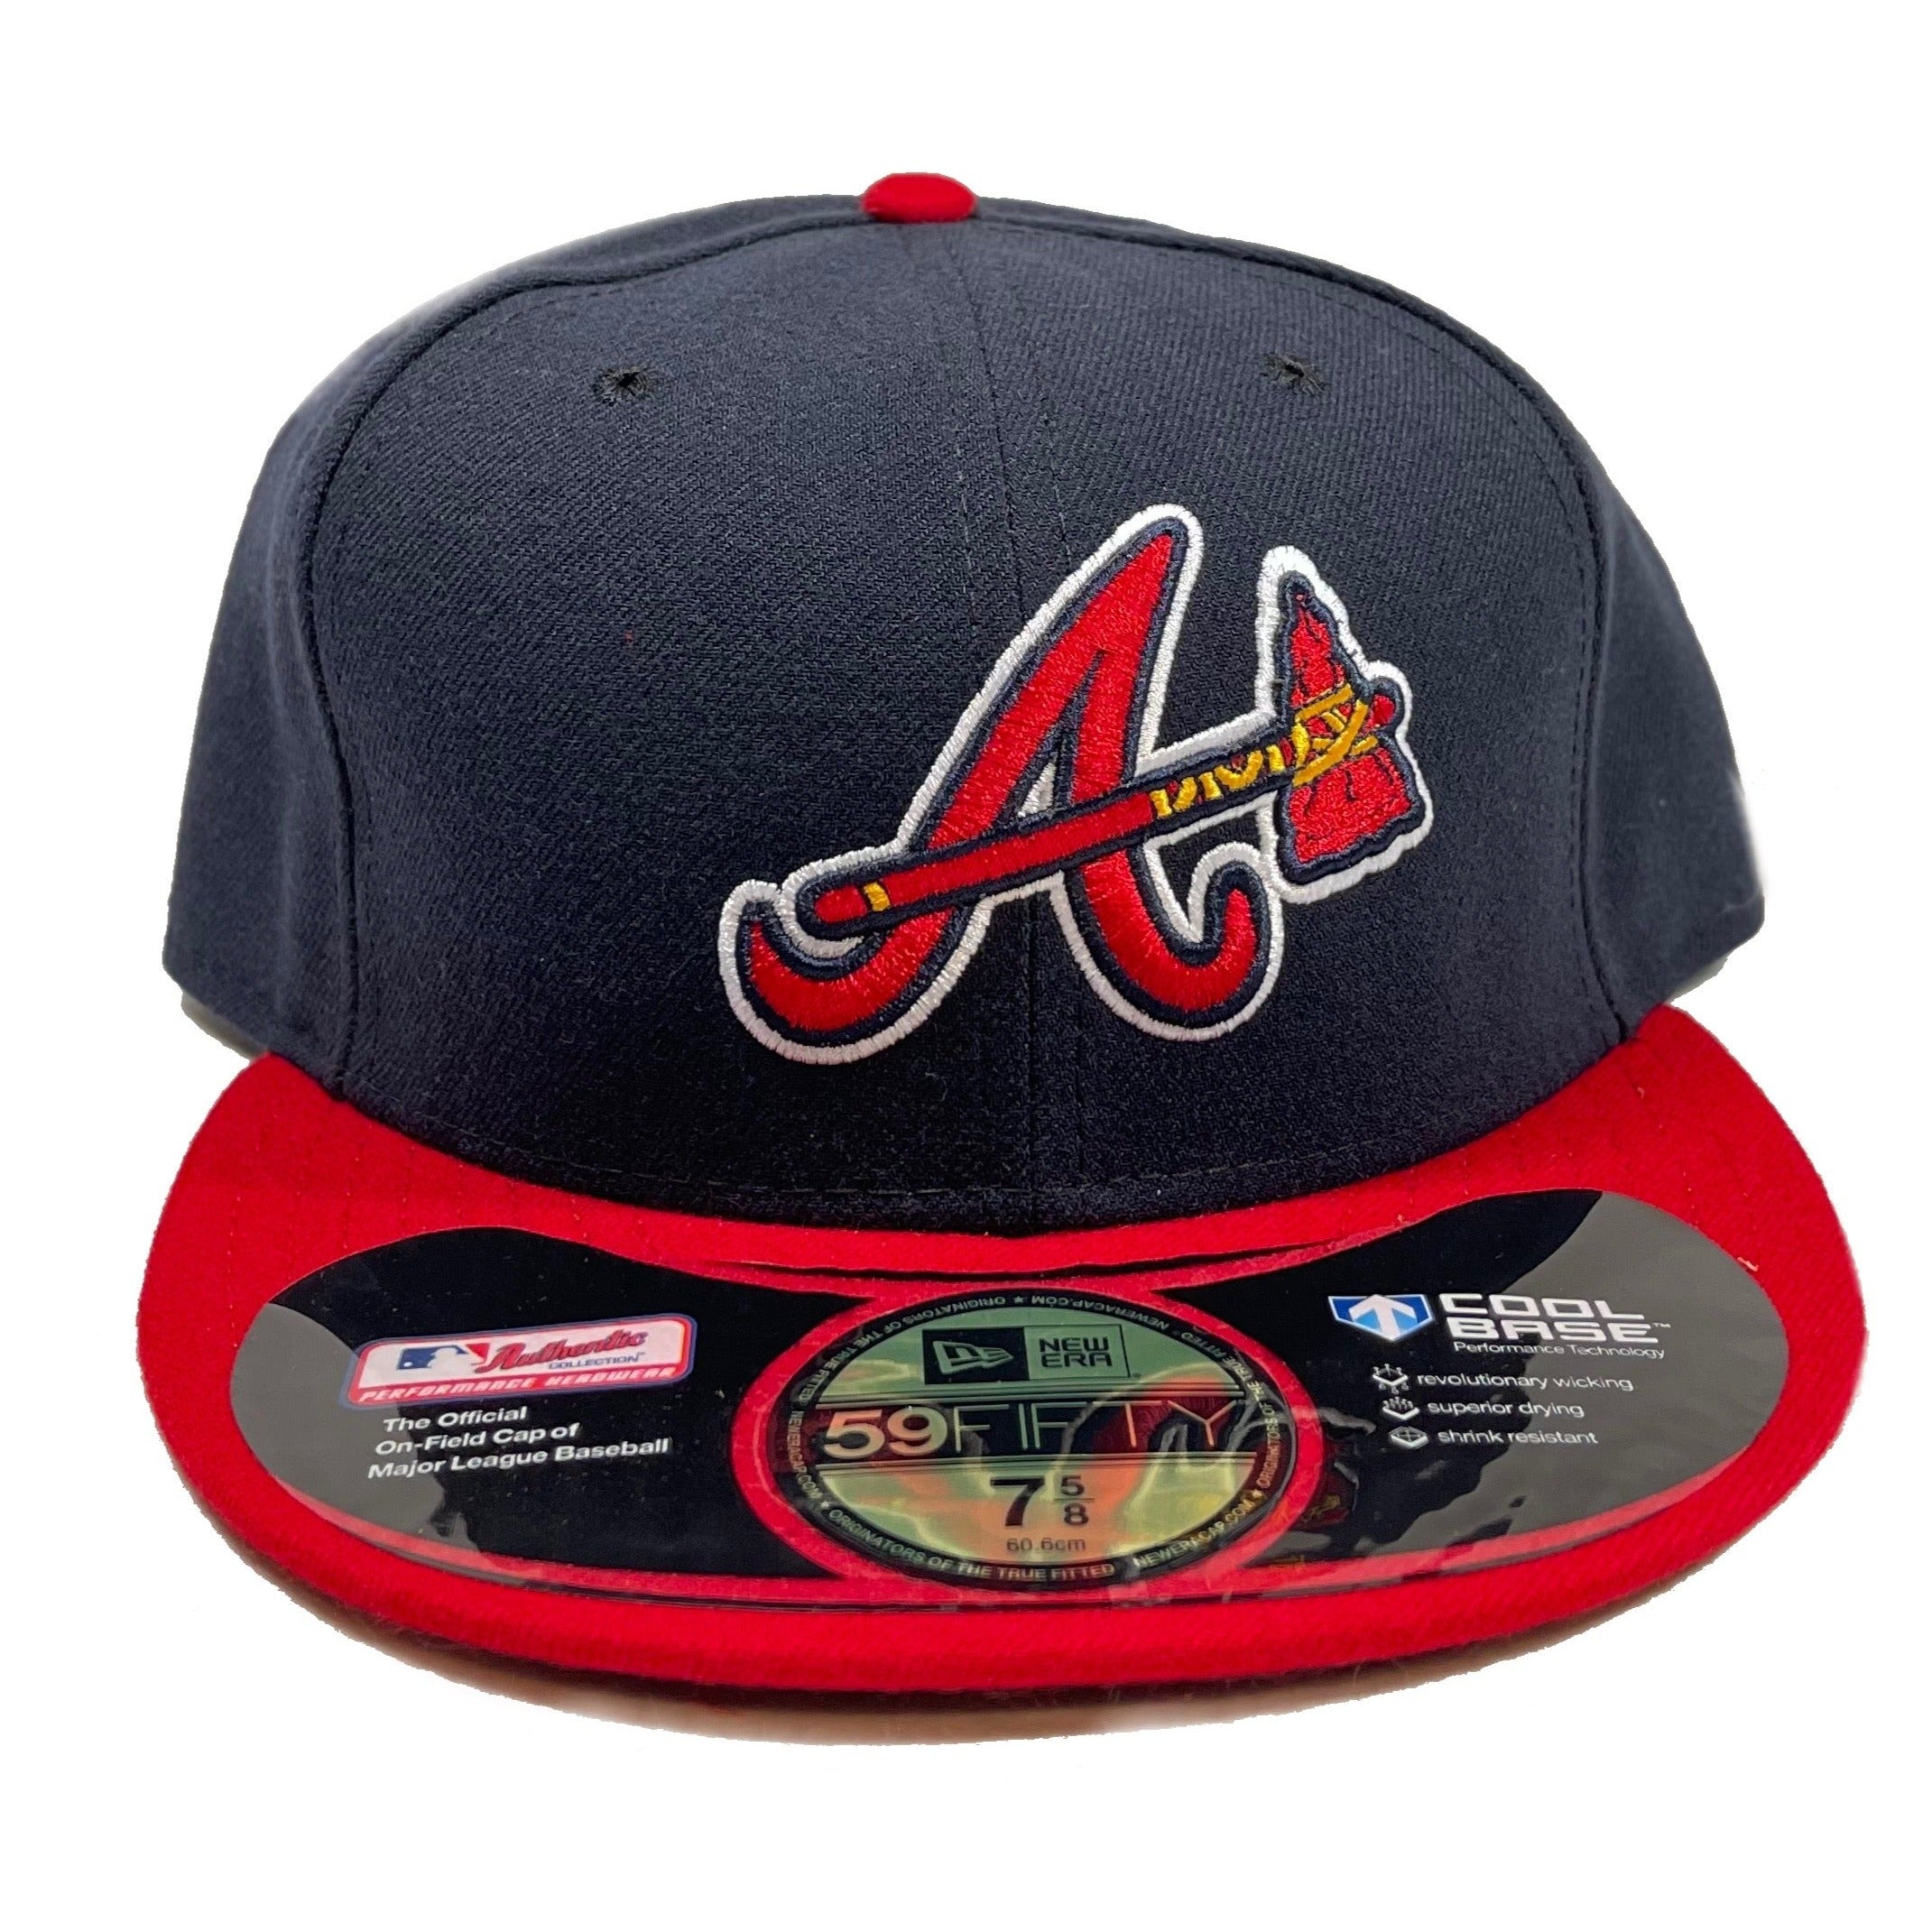 Men's New Era Navy/Red Atlanta Braves Home Authentic Collection On